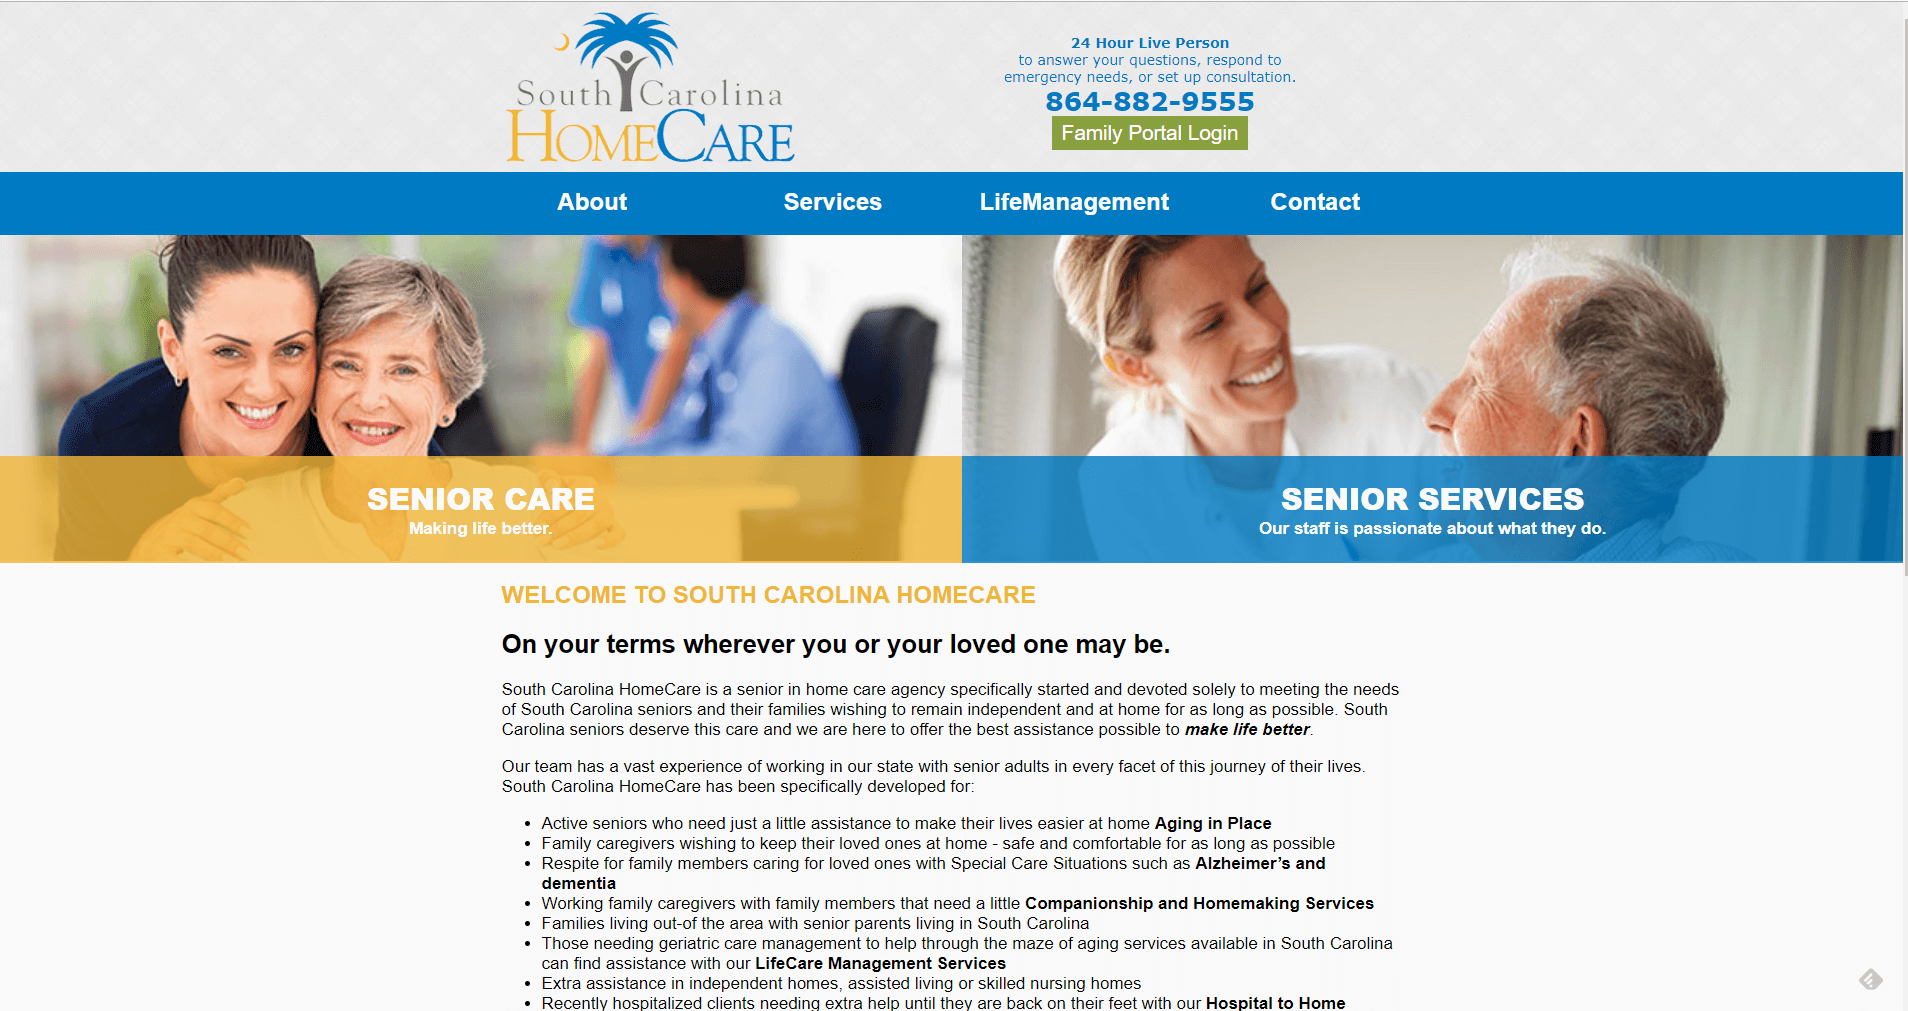 Responsive Design for Home Healthcare